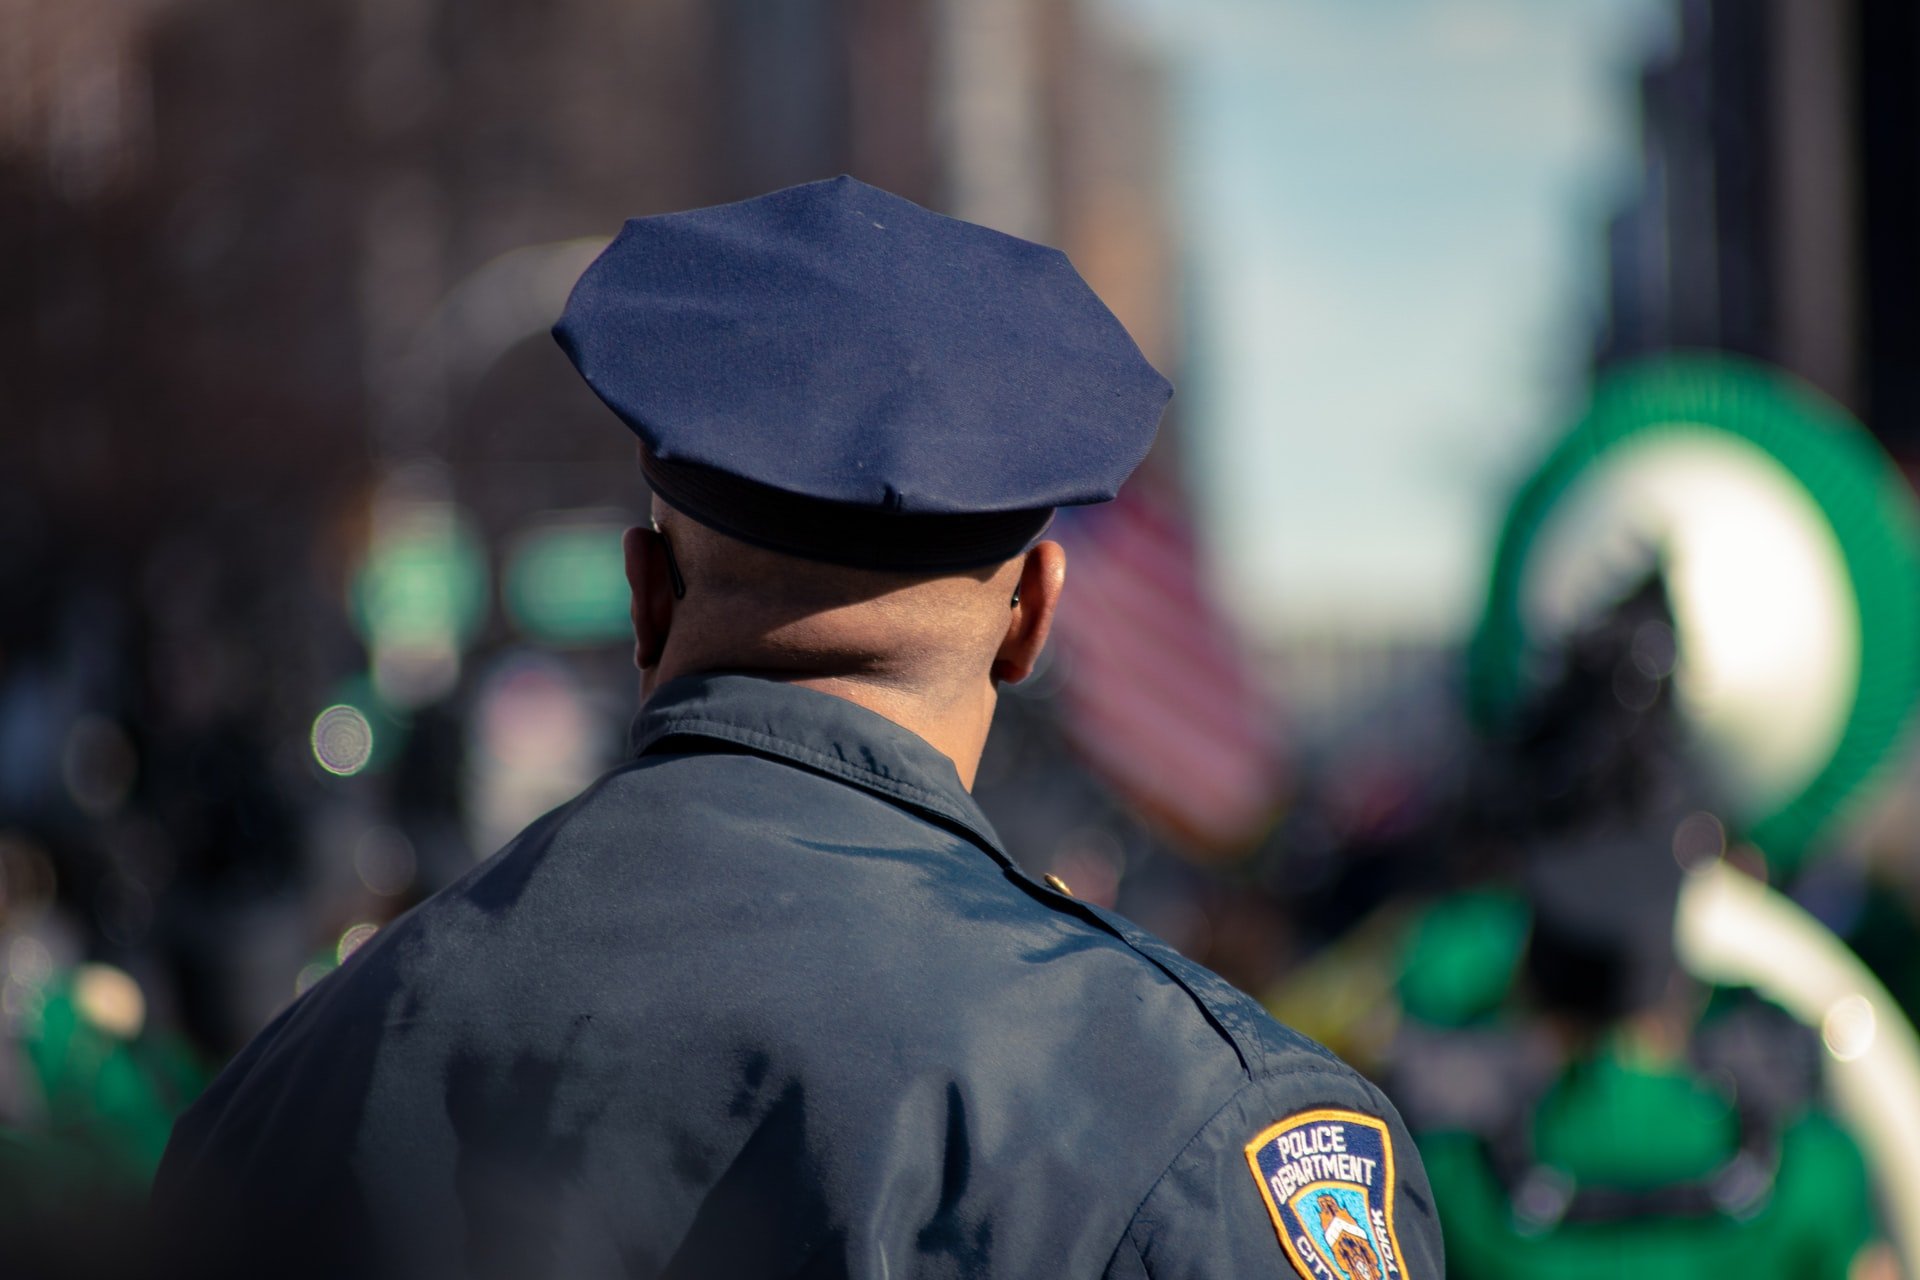 The police officer called another cop | Source: Unsplash